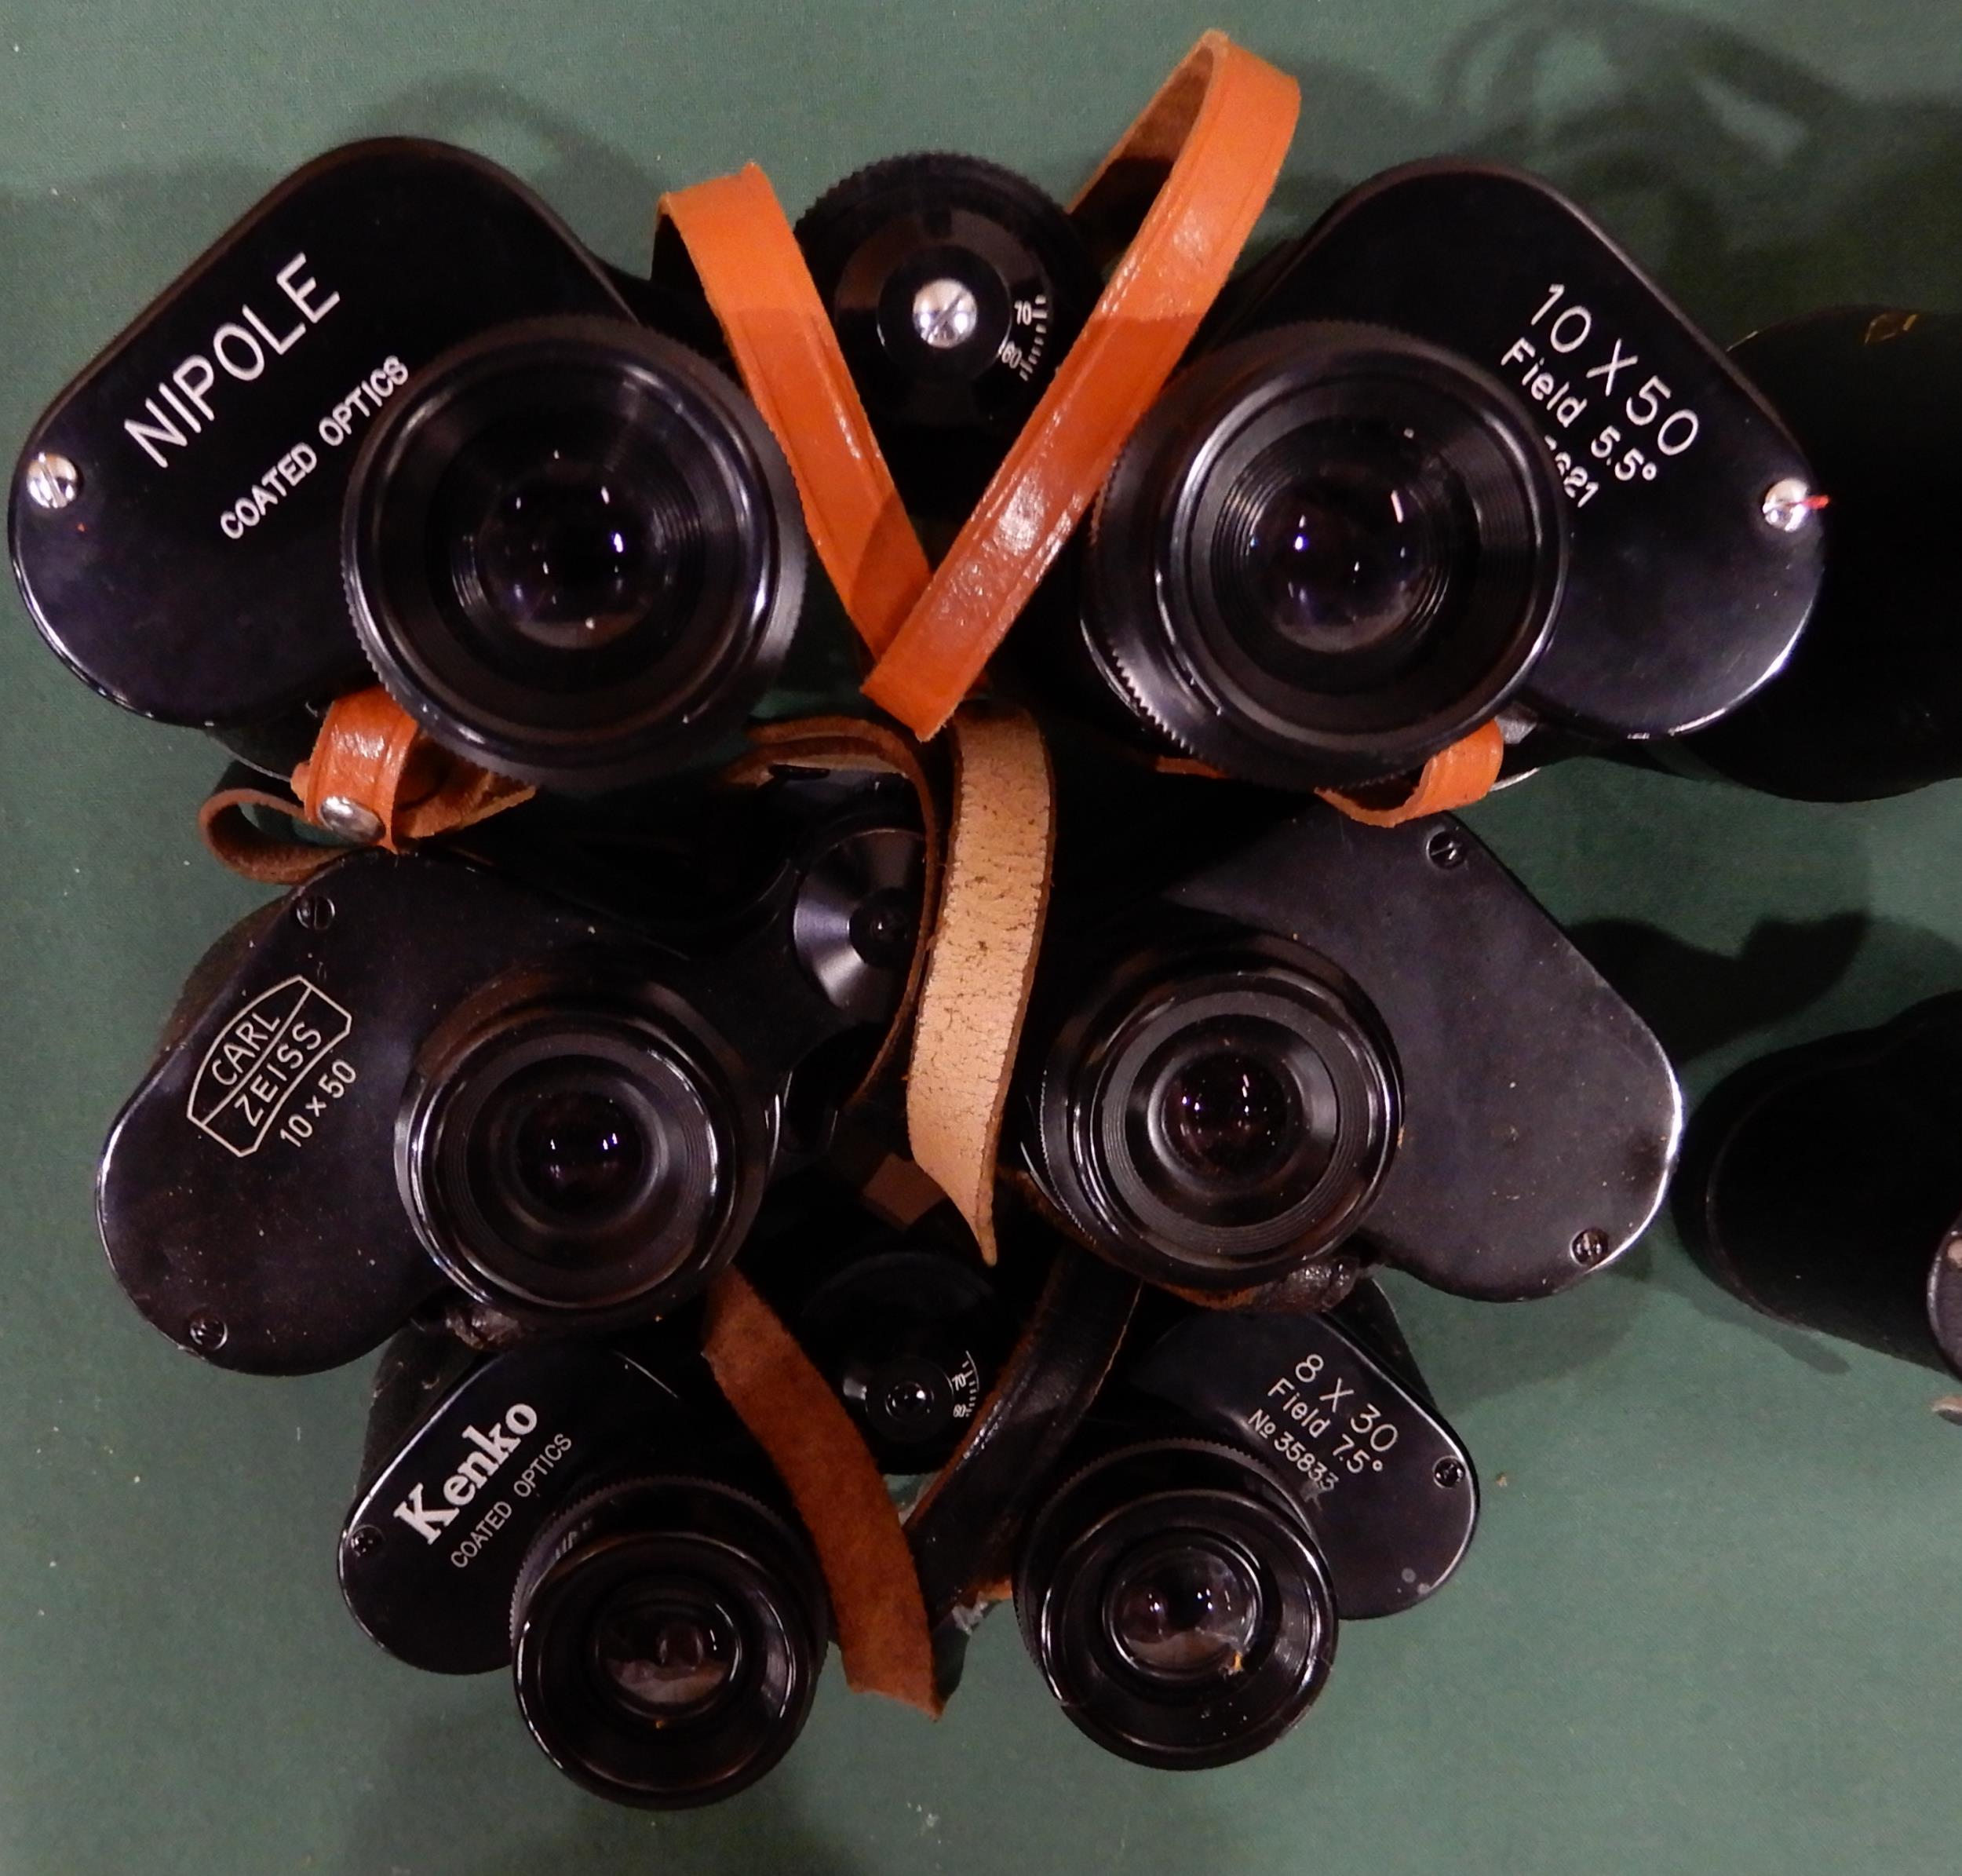 A quantity of binoculars with various makers and models with Nikon, Pentax, E. Leitz, Carl Zeiss, - Image 10 of 19